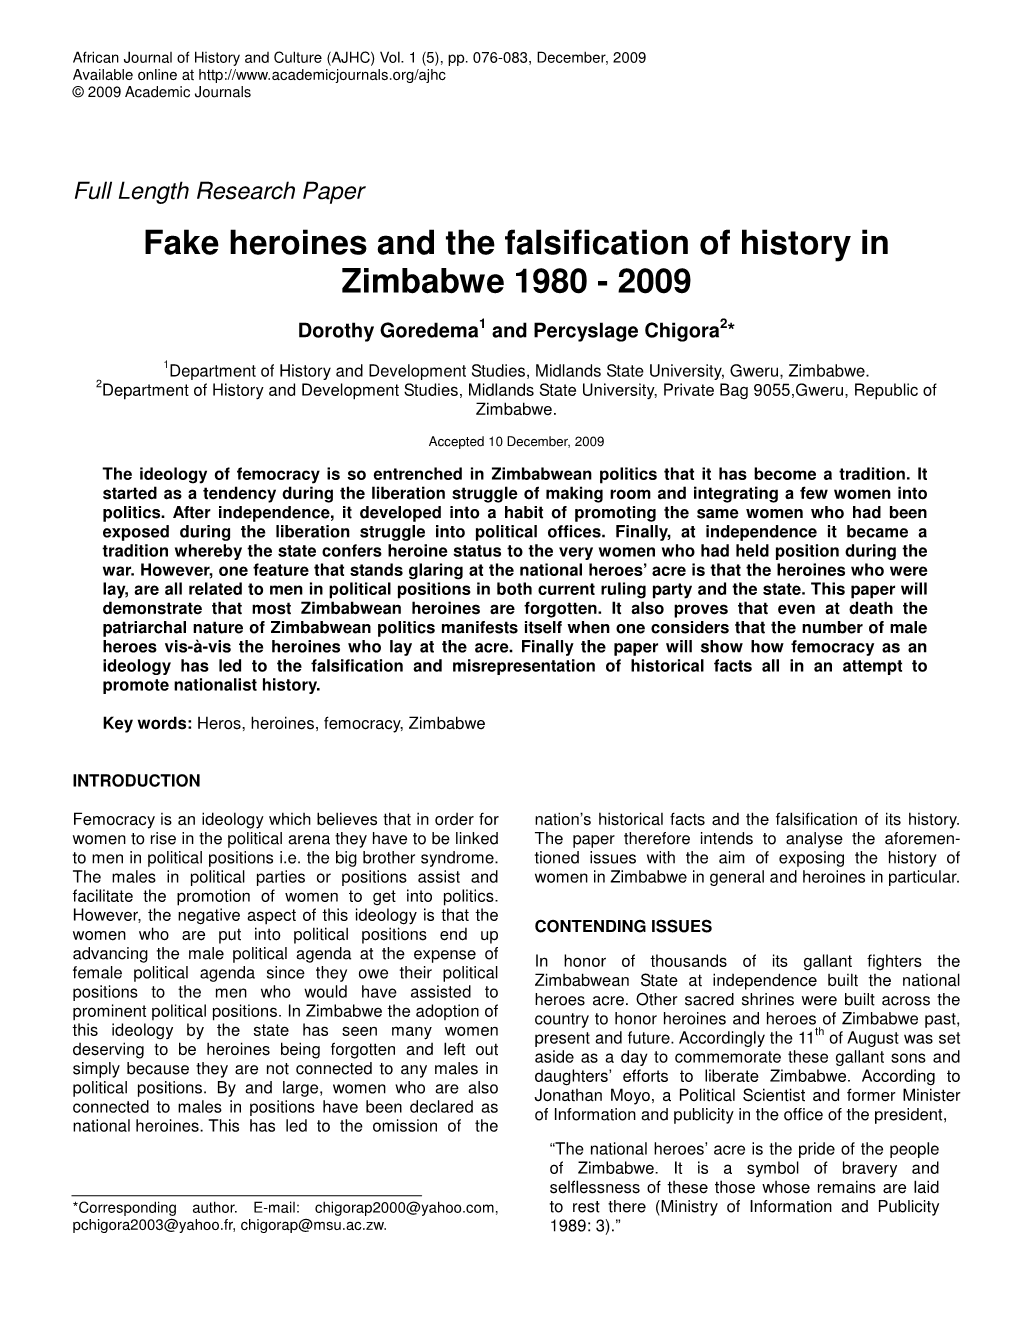 Fake Heroines and the Falsification of History in Zimbabwe 1980 - 2009